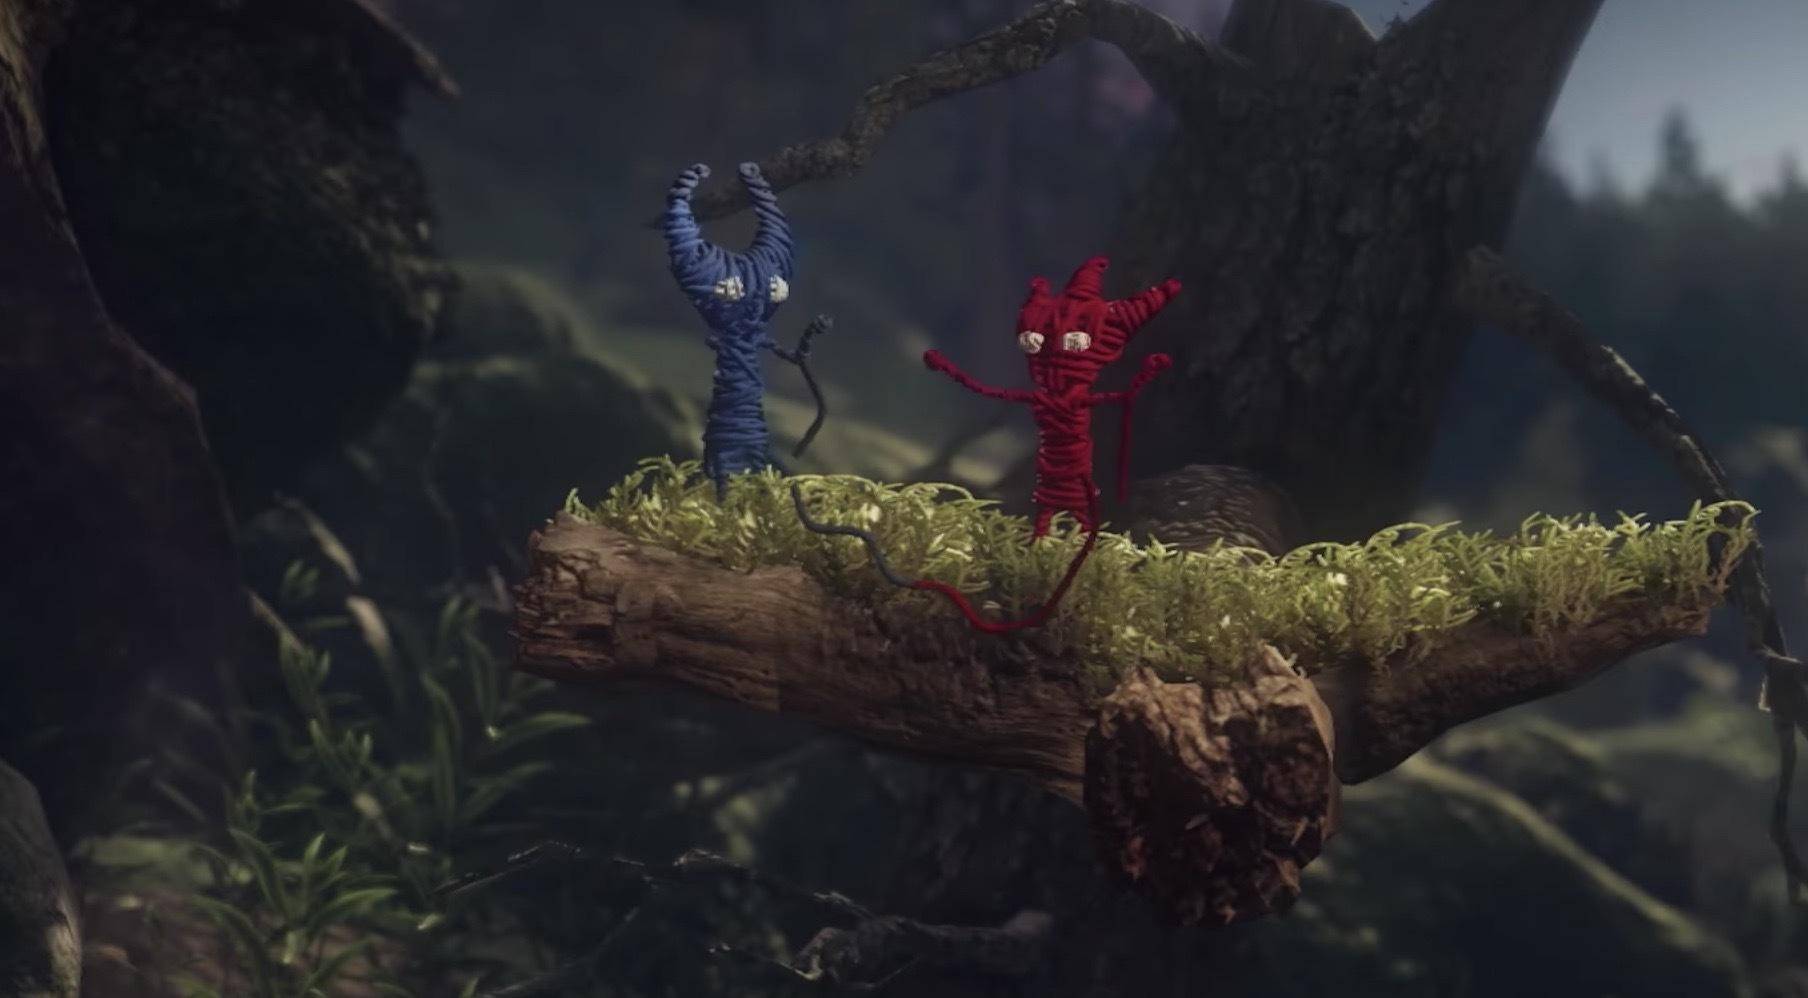 Unravel Two on PS4 — price history, screenshots, discounts • USA